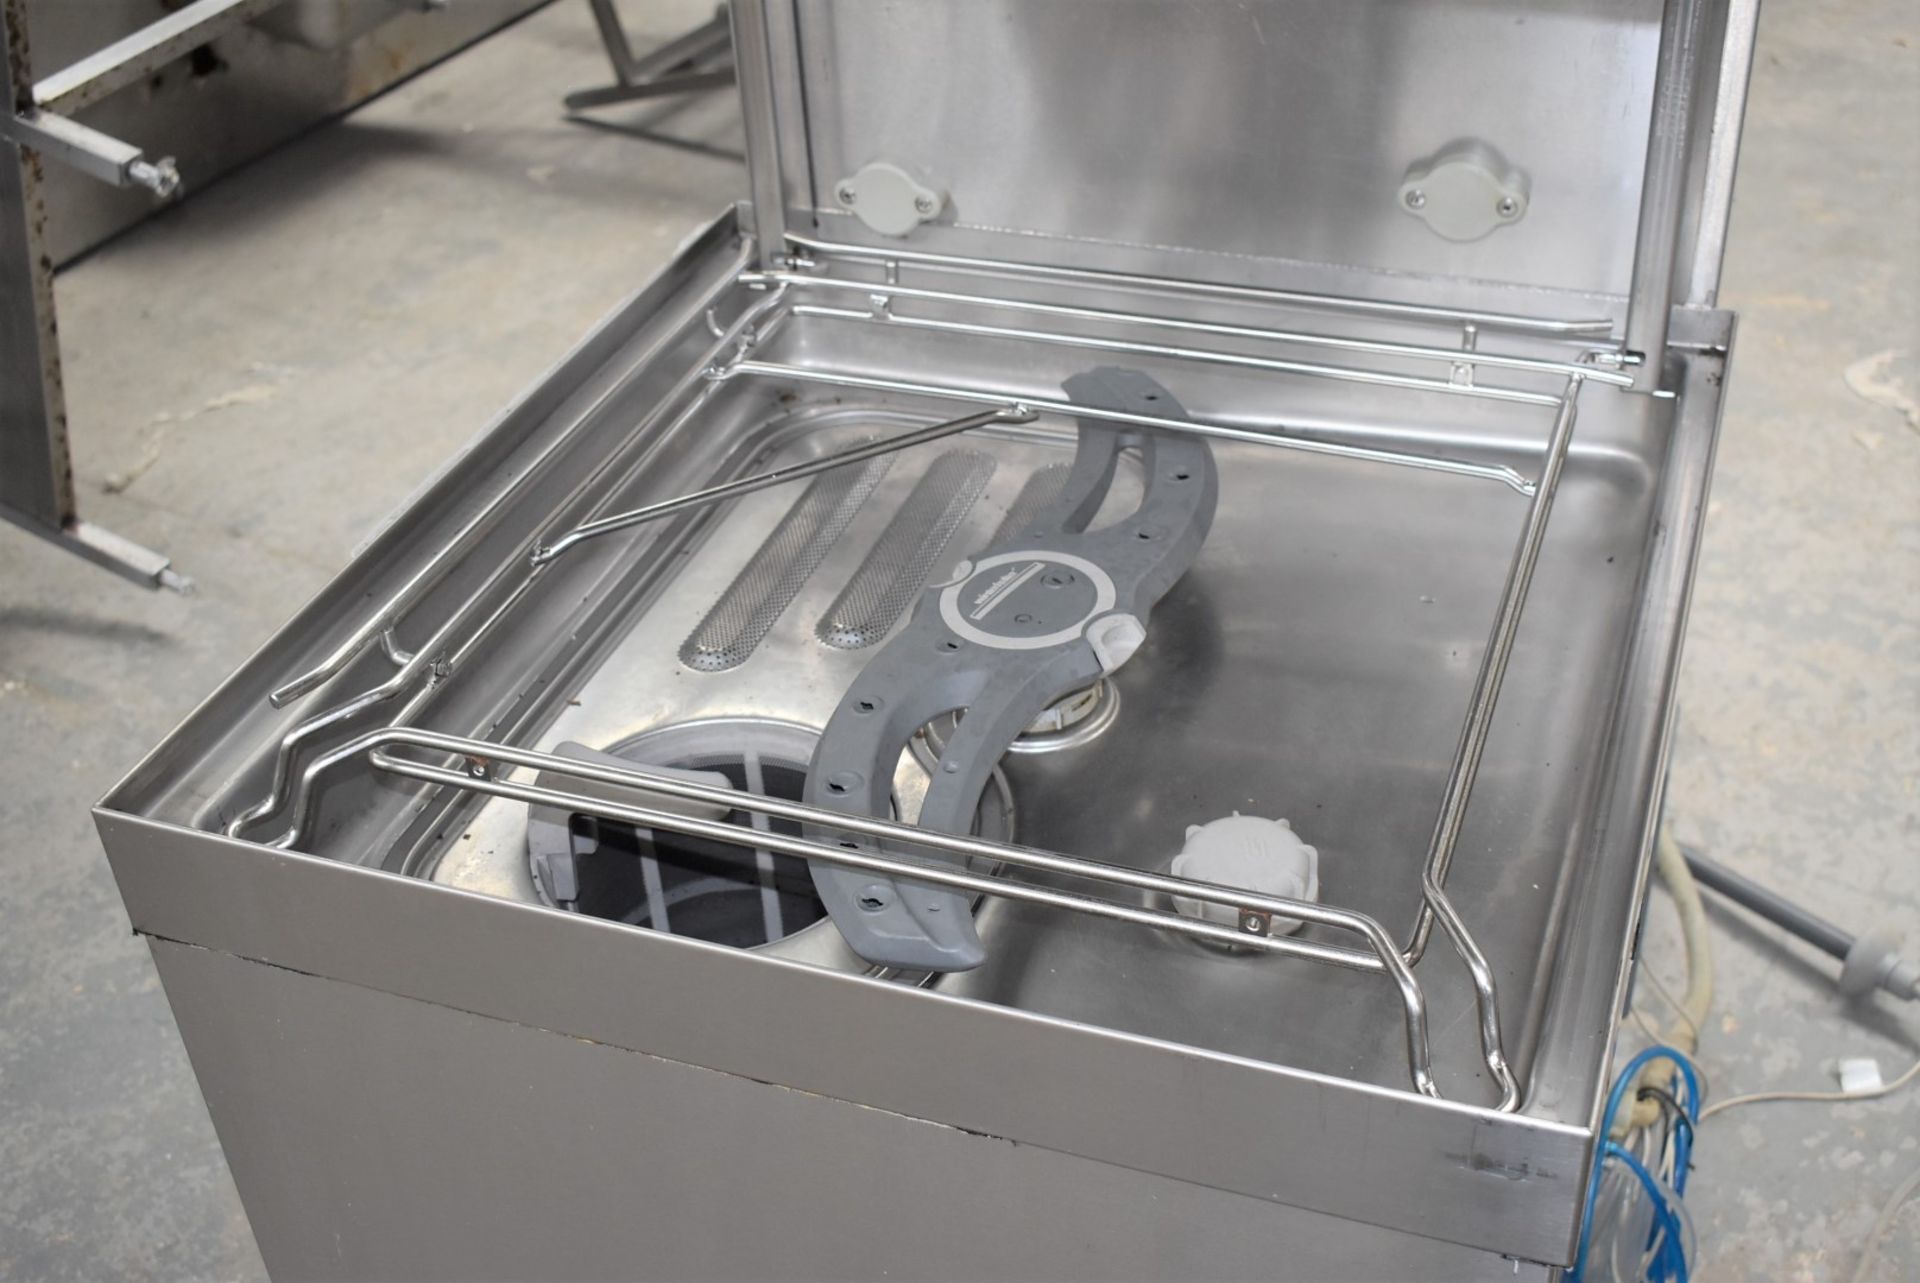 1 x Winterhalter PT-M Series Commercial Passthrough Dishwasher - 2022 Model - Approx RRP £20,000 - Image 11 of 20